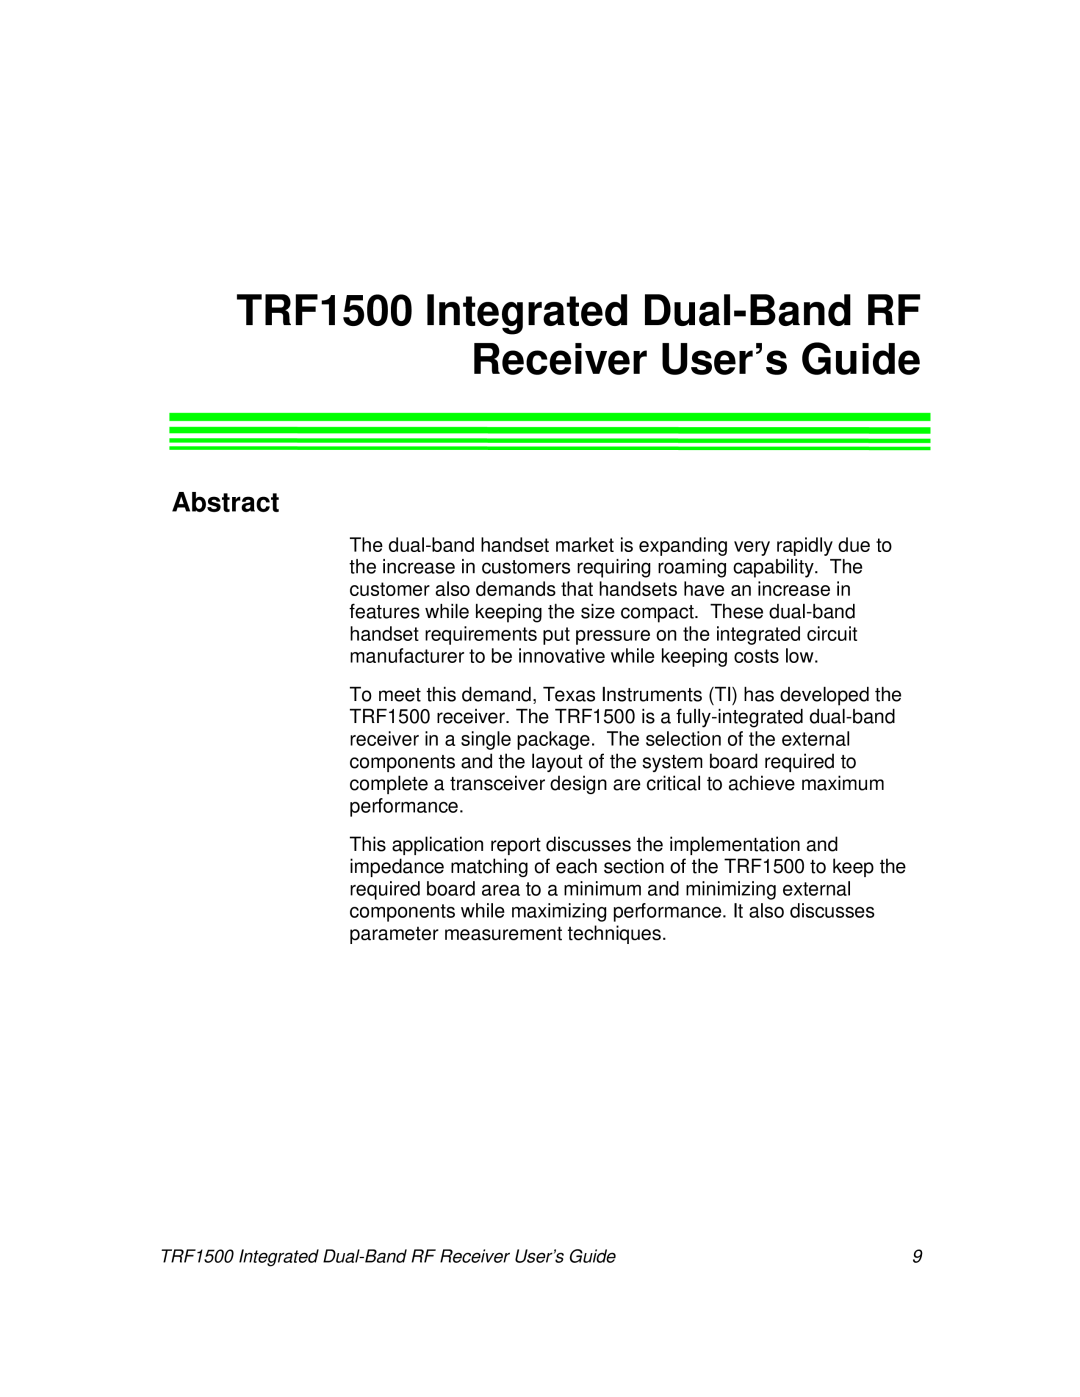 Texas Instruments TRF1500 manual Abstract 